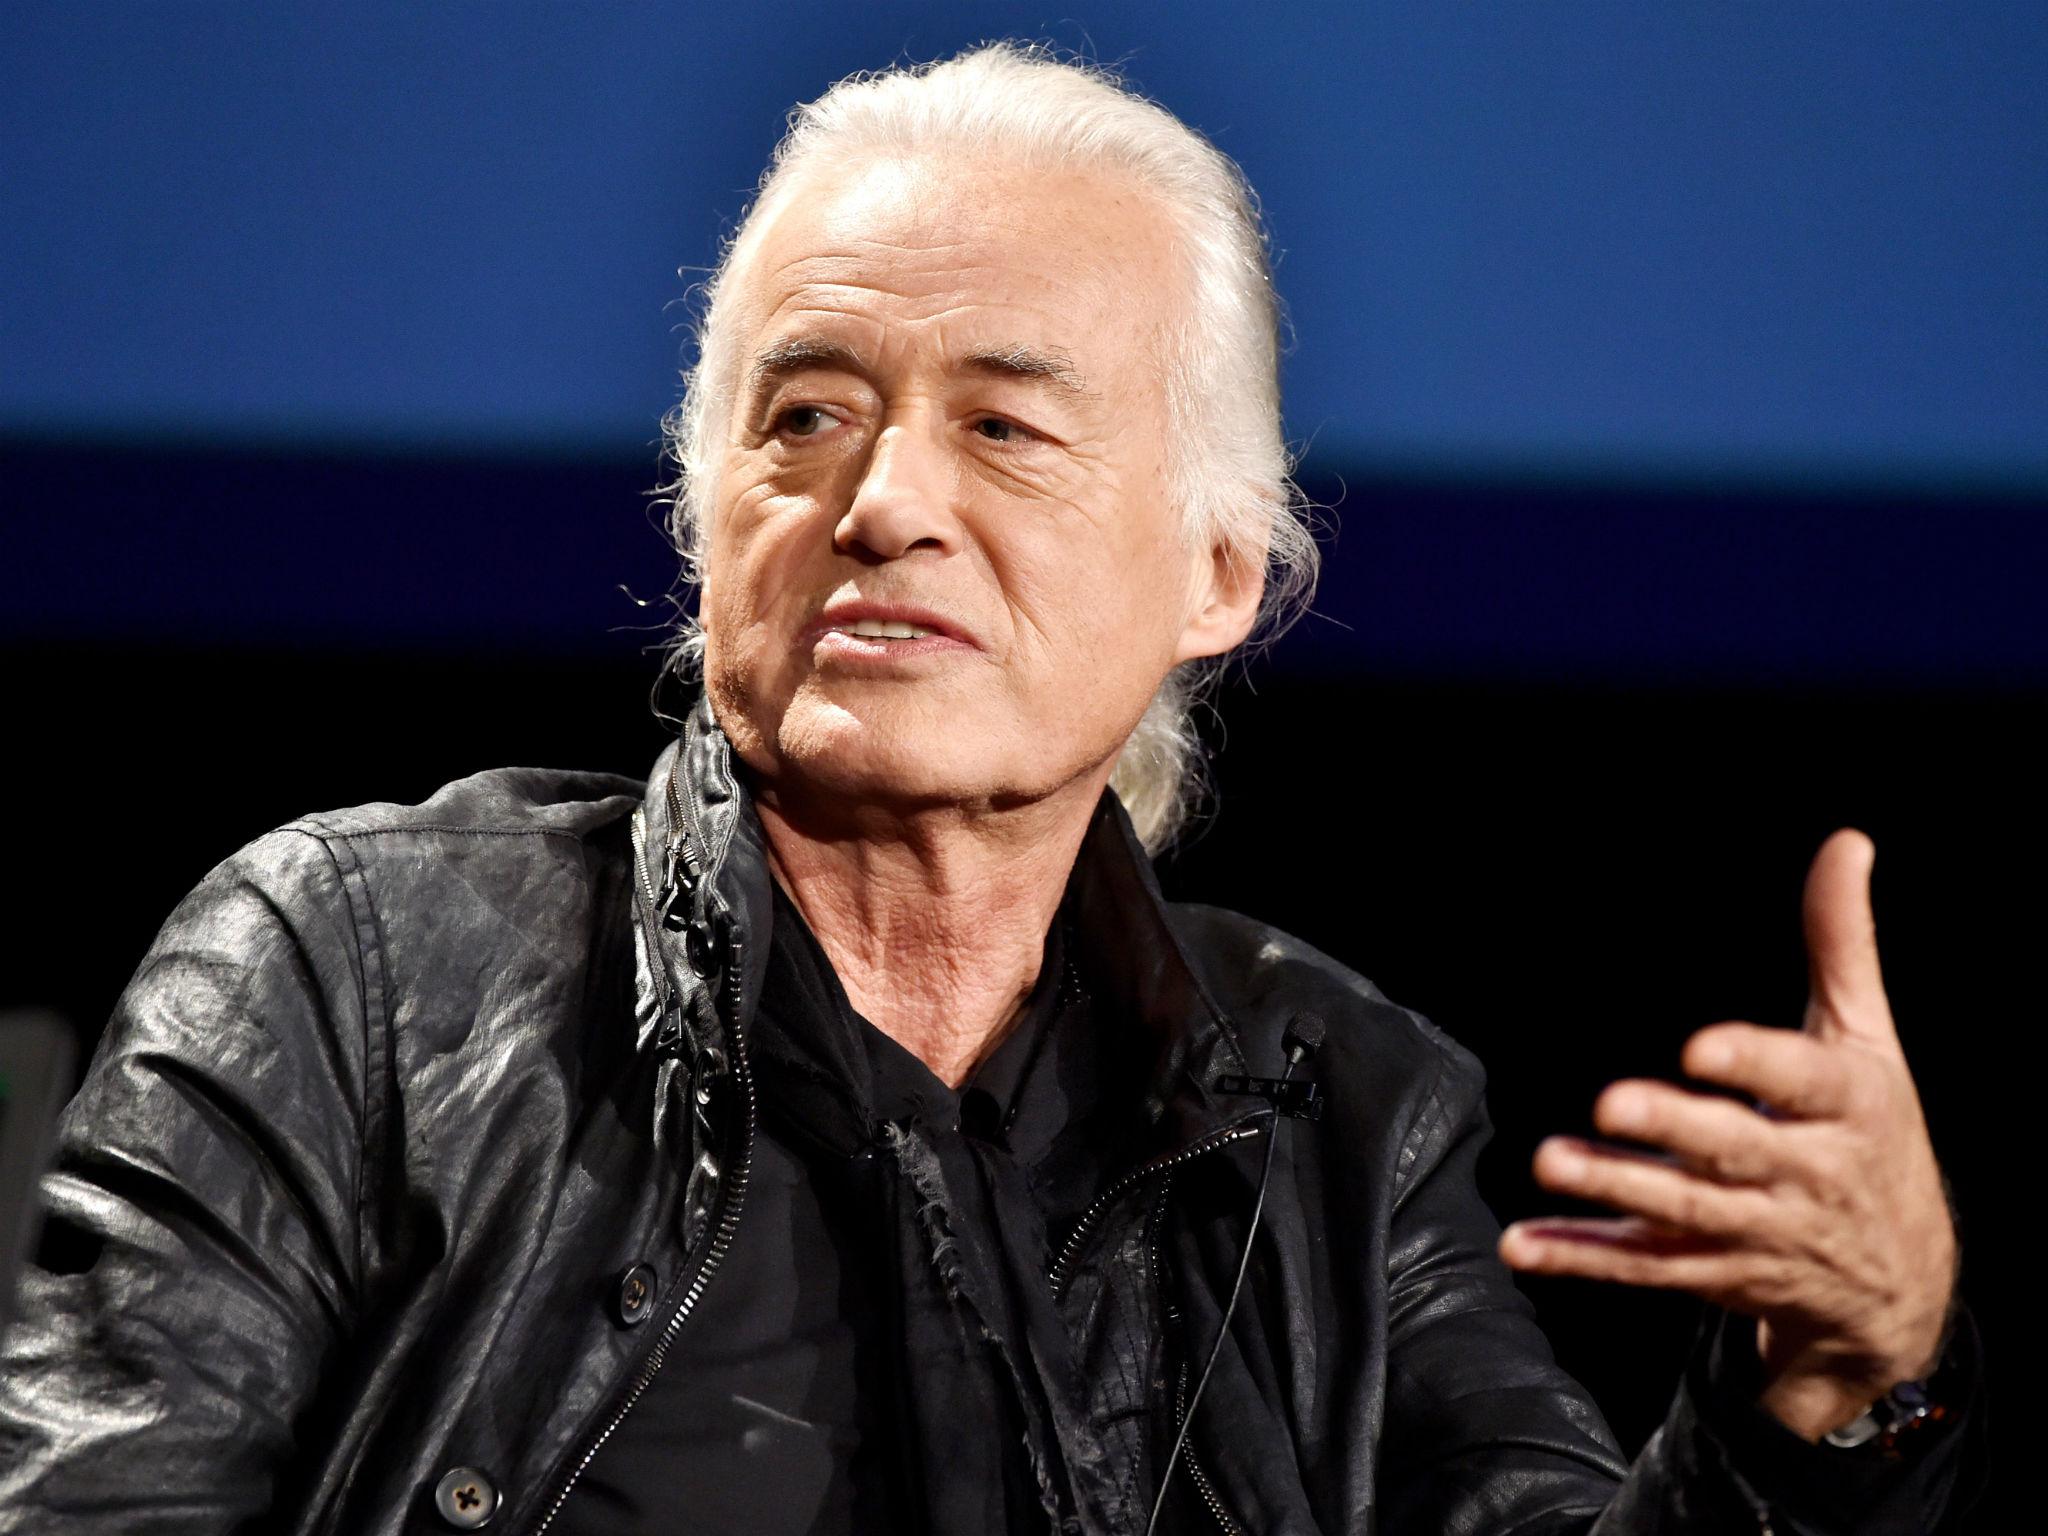 Jimmy Page, pictured here in 2014, insists he only heard 'Taurus' two years ago